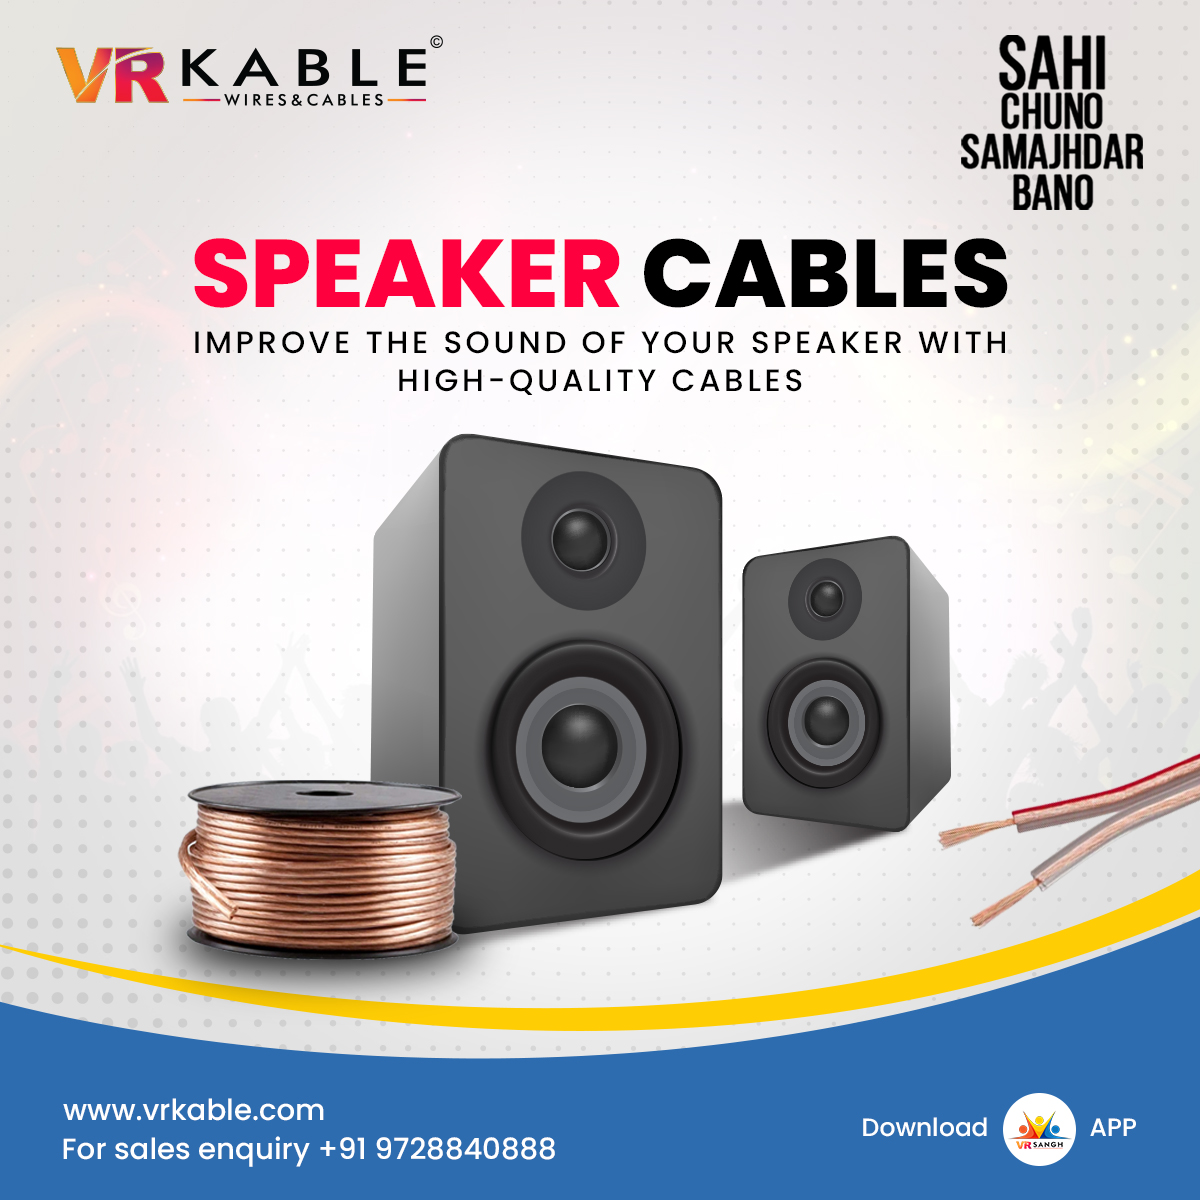 🔊Elevate Your Sound Experience with VR KABLE Speaker Cables 🔊

🎵Why should you choose VR KABLE Speaker Cables? 🎵
🔊Unparalleled Sound Quality
🔌Reliable Connection
🧊Durability
🌟Easy to Install

For more details call us on 09728840888 

#VRKABLE #AudioQuality #SpeakerCables